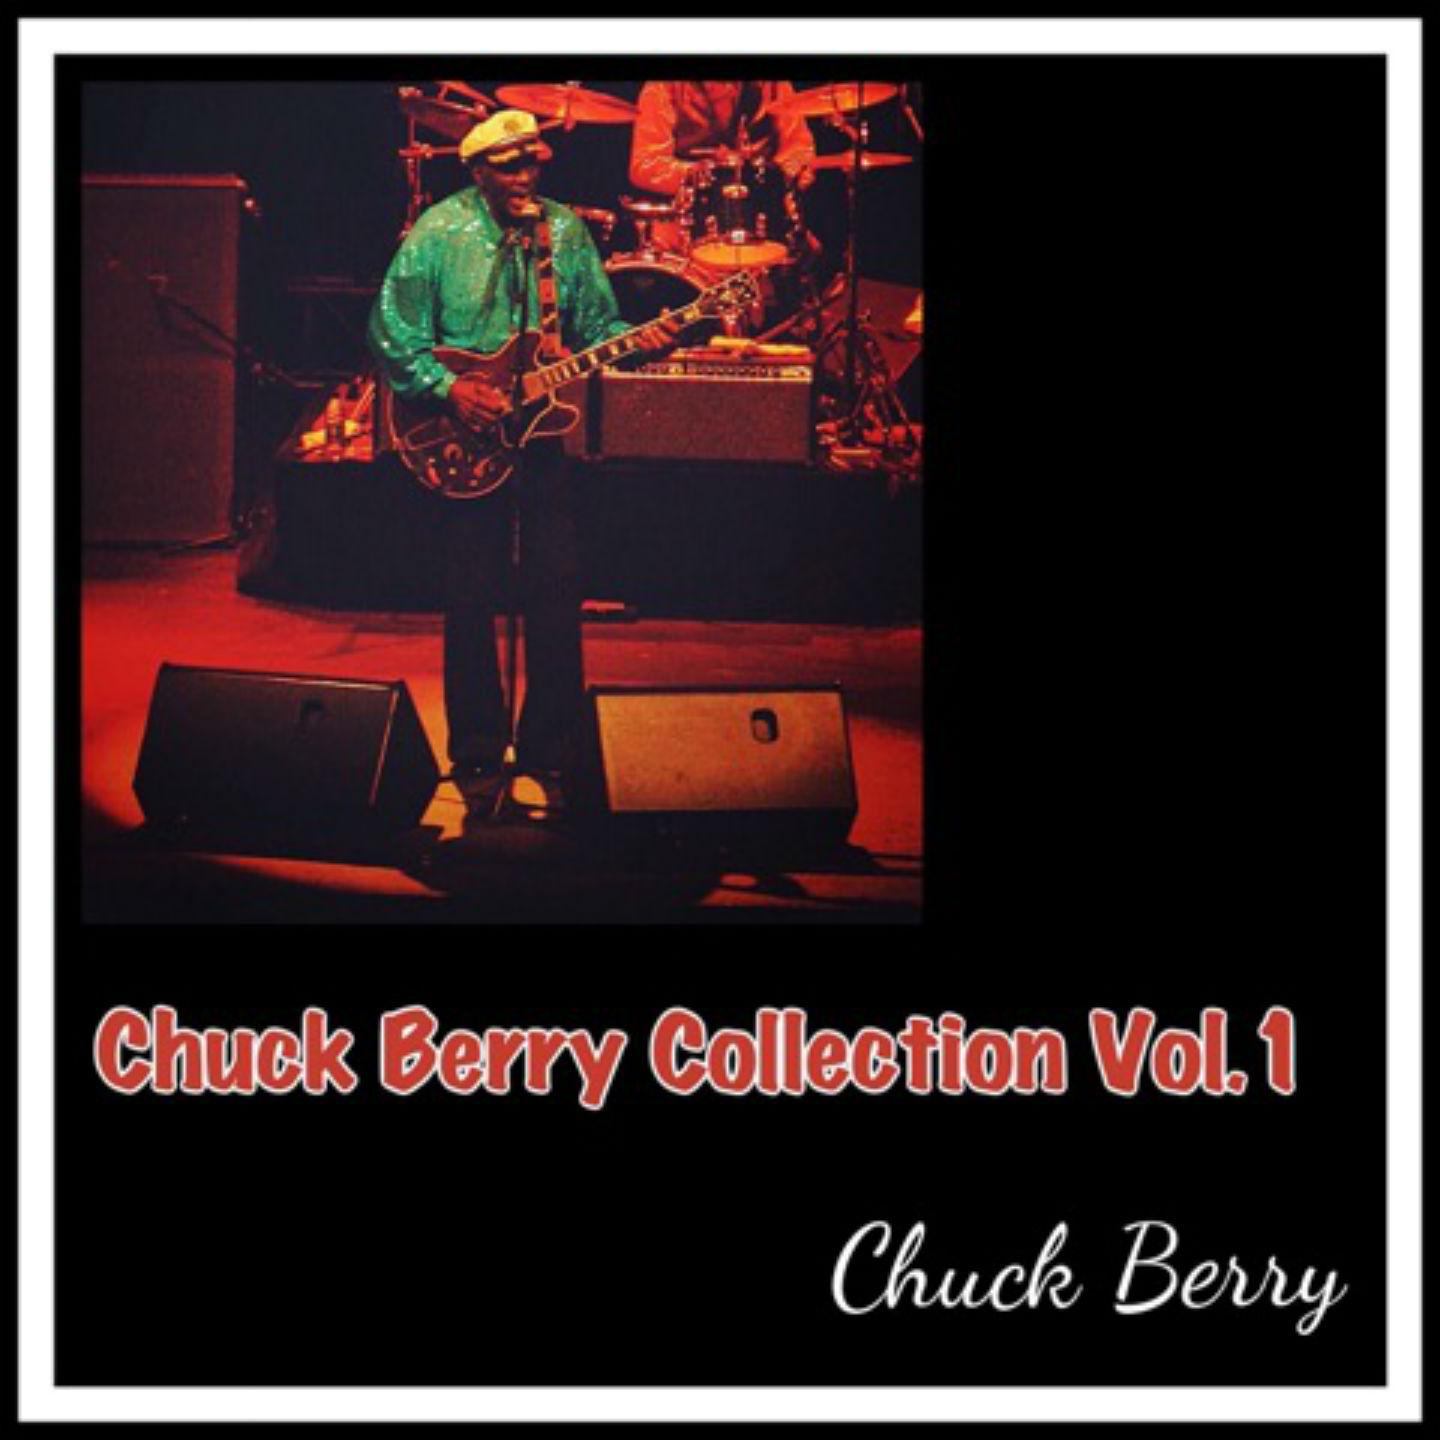 Chuck Berry Collection Vol. 1